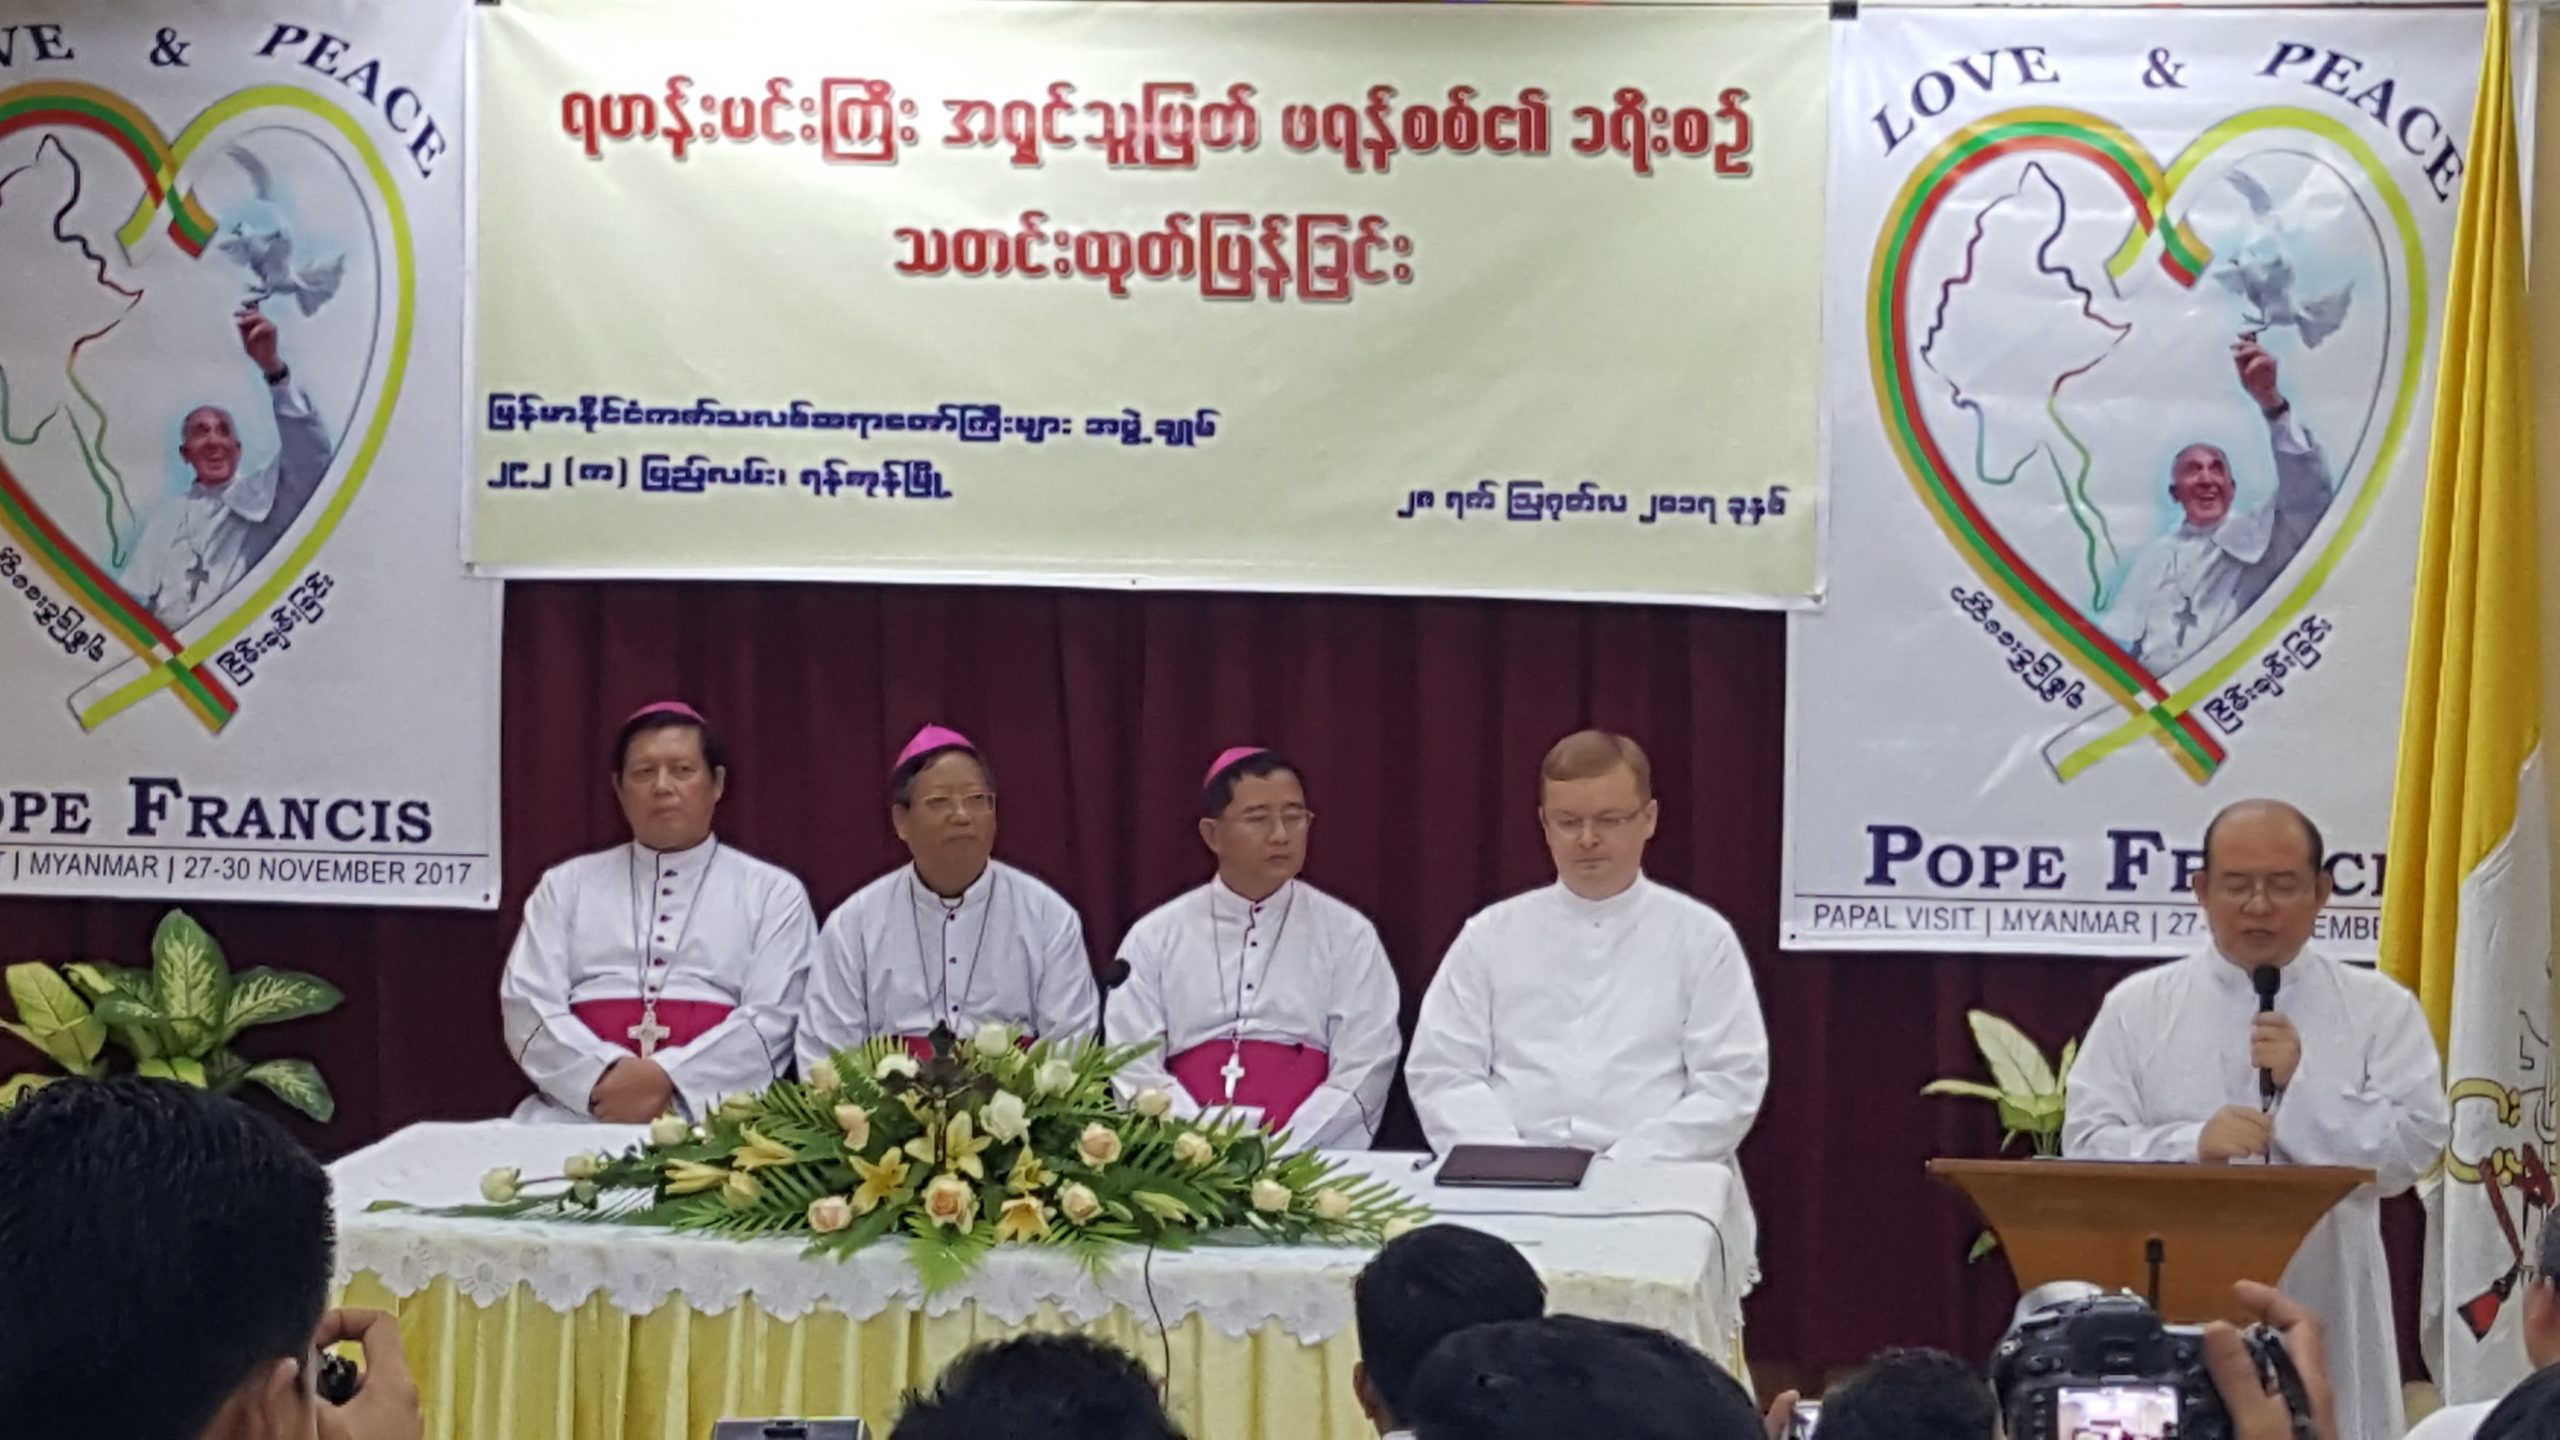 Burma (Myanmar): Bishop John Hsane Hgyi of Pathein (far left) with fellow bishops at a press conference about Pope Francis’ visit to Burma (© Aid to the Church in Need)